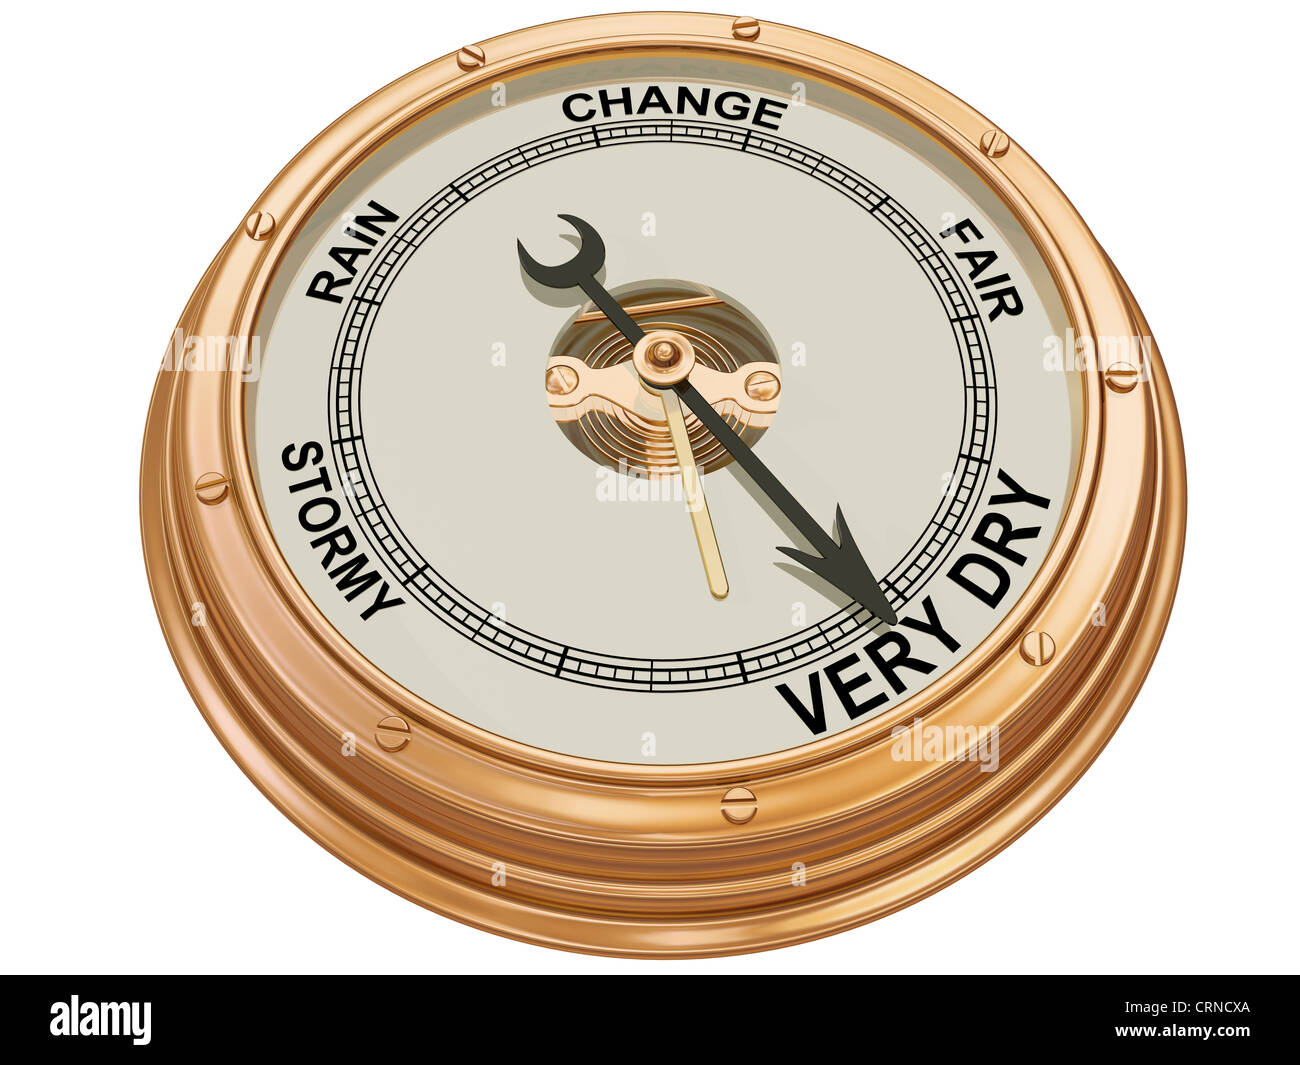 Isolated illustration of a barometer indicating very dry conditions Stock Photo